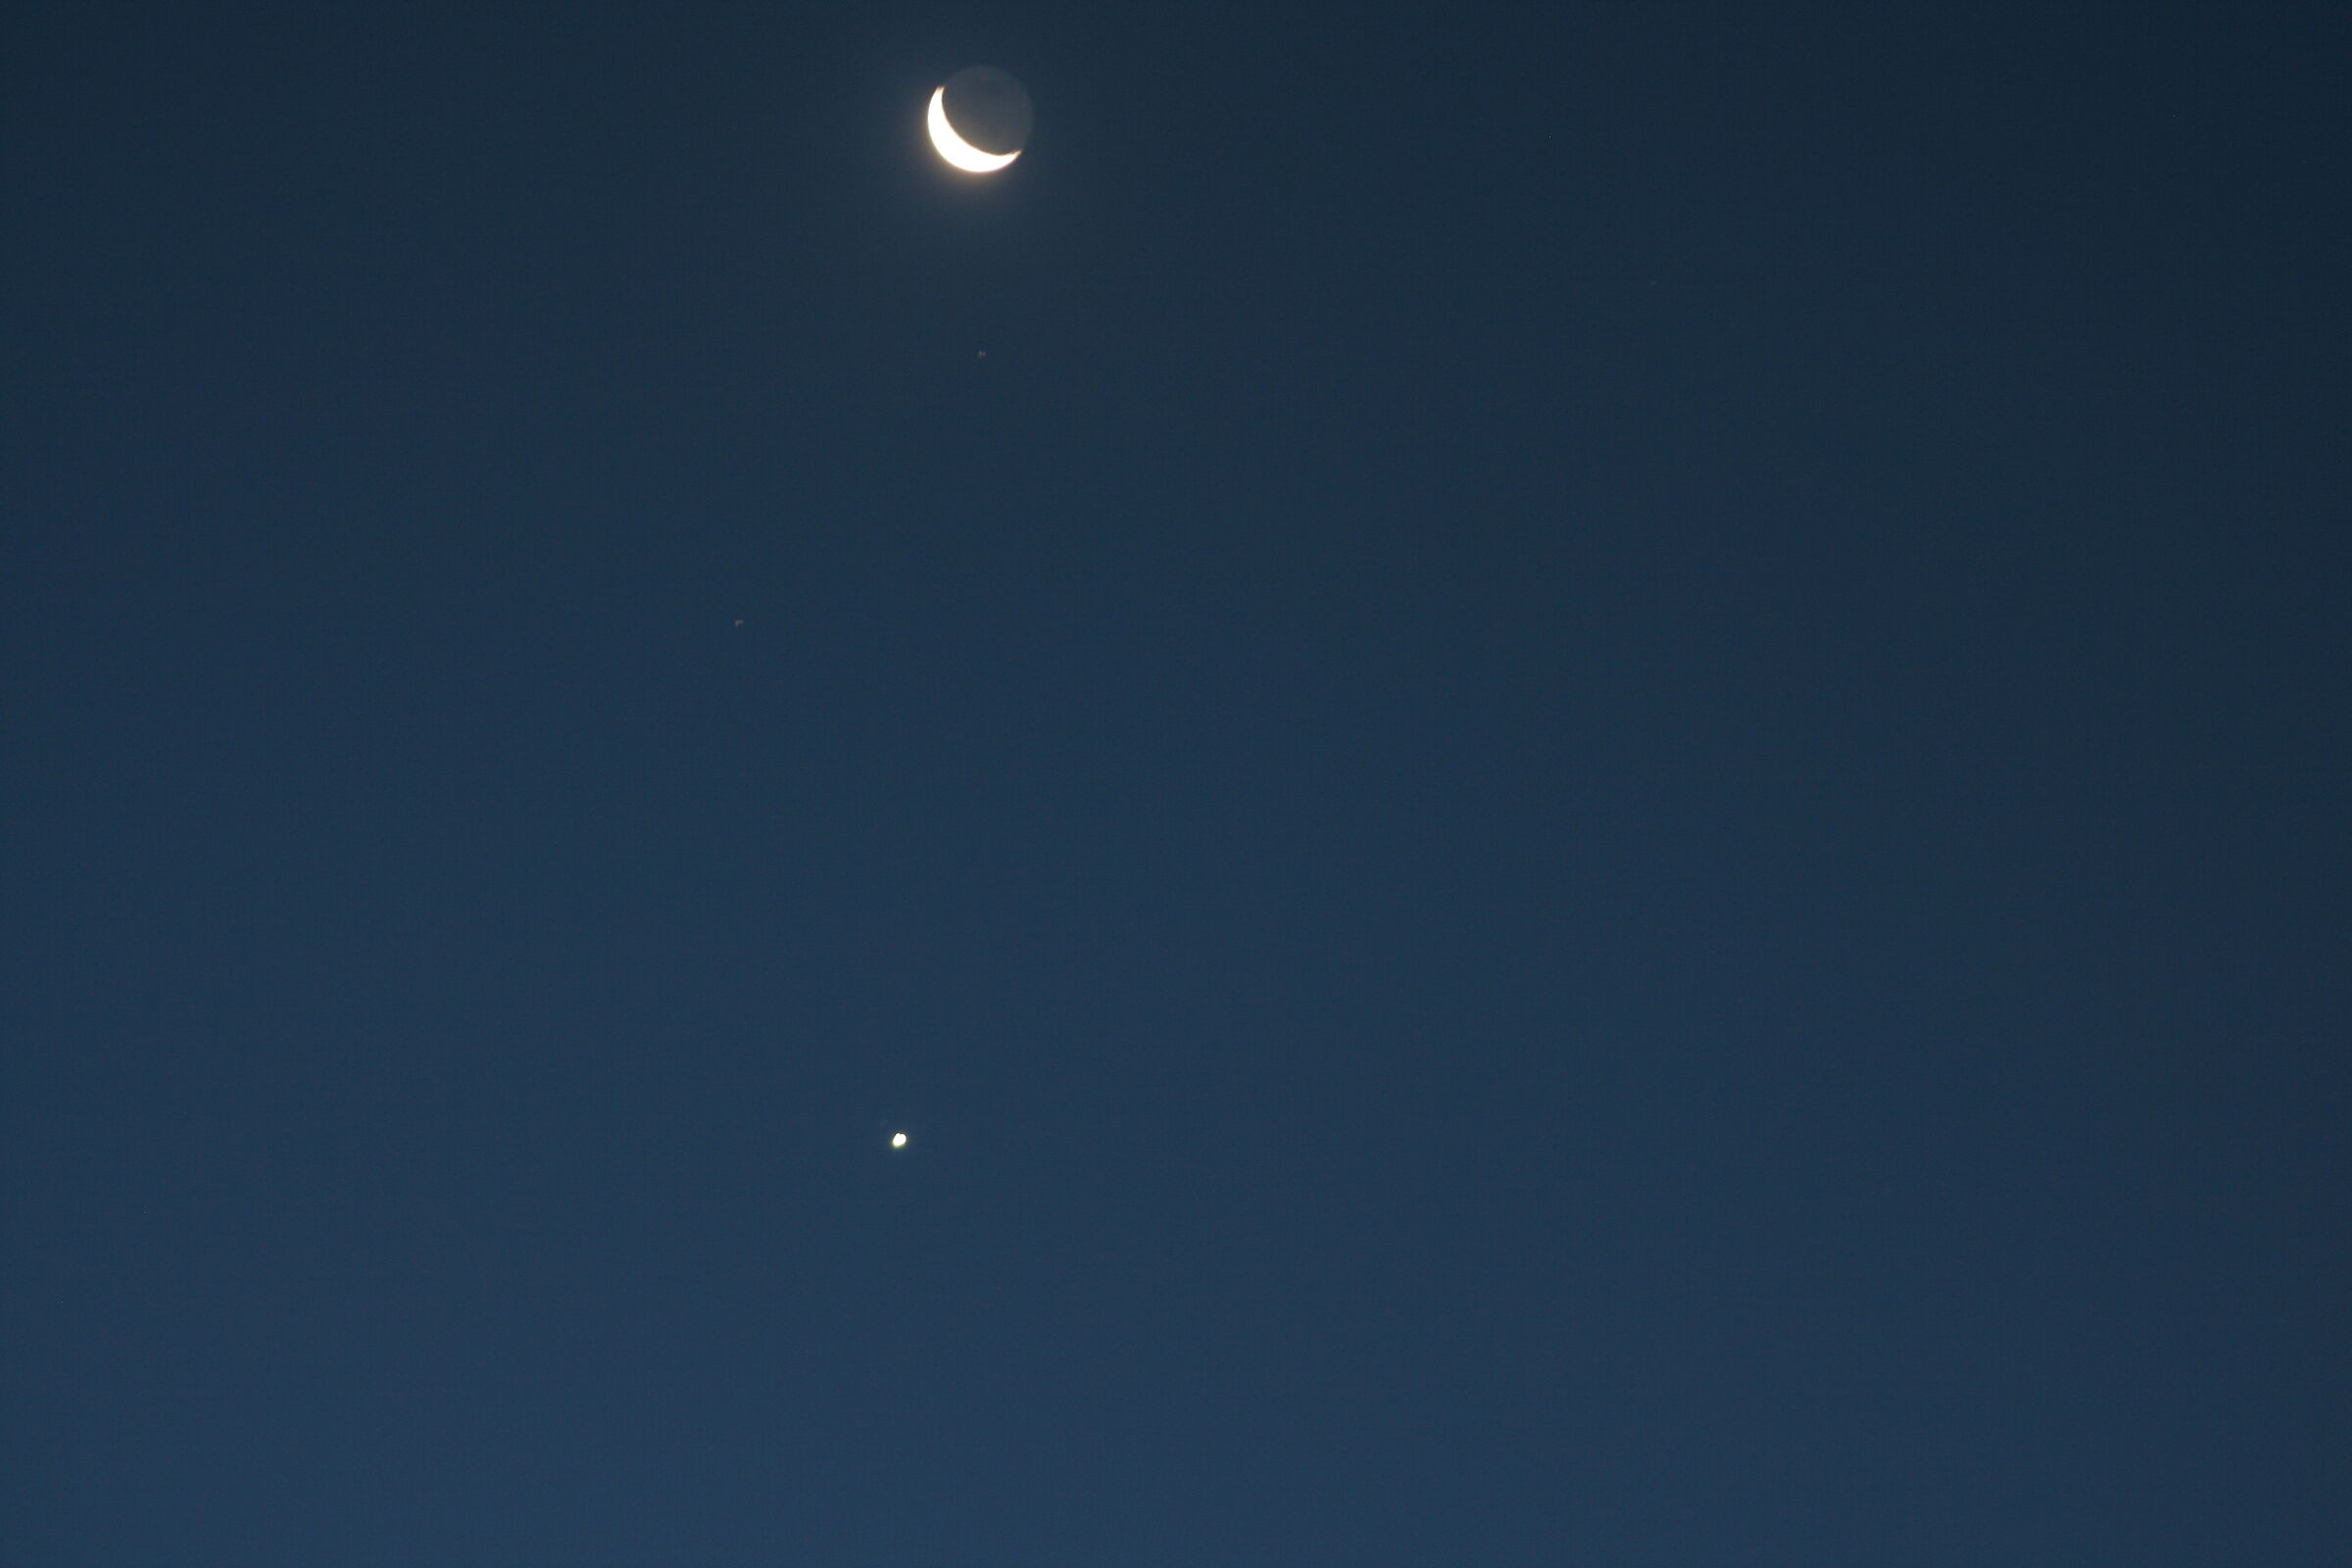 Moon Venus and something passing by...